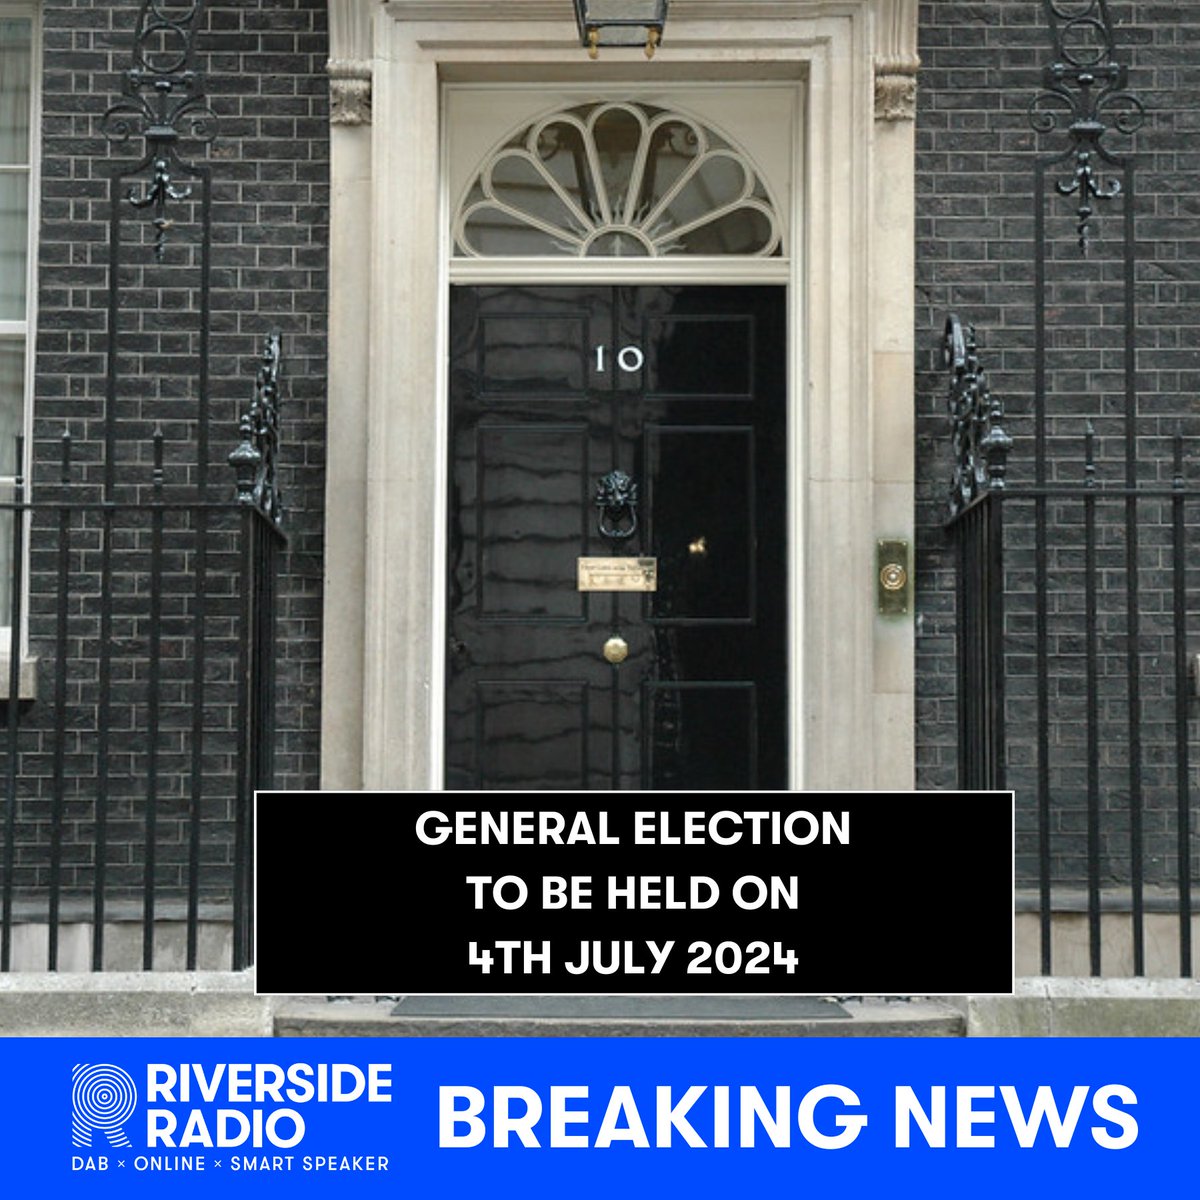 📰 BREAKING NEWS 📰 Prime Minister Rishi Sunak has announced that the General Election will be held on JULY 4TH